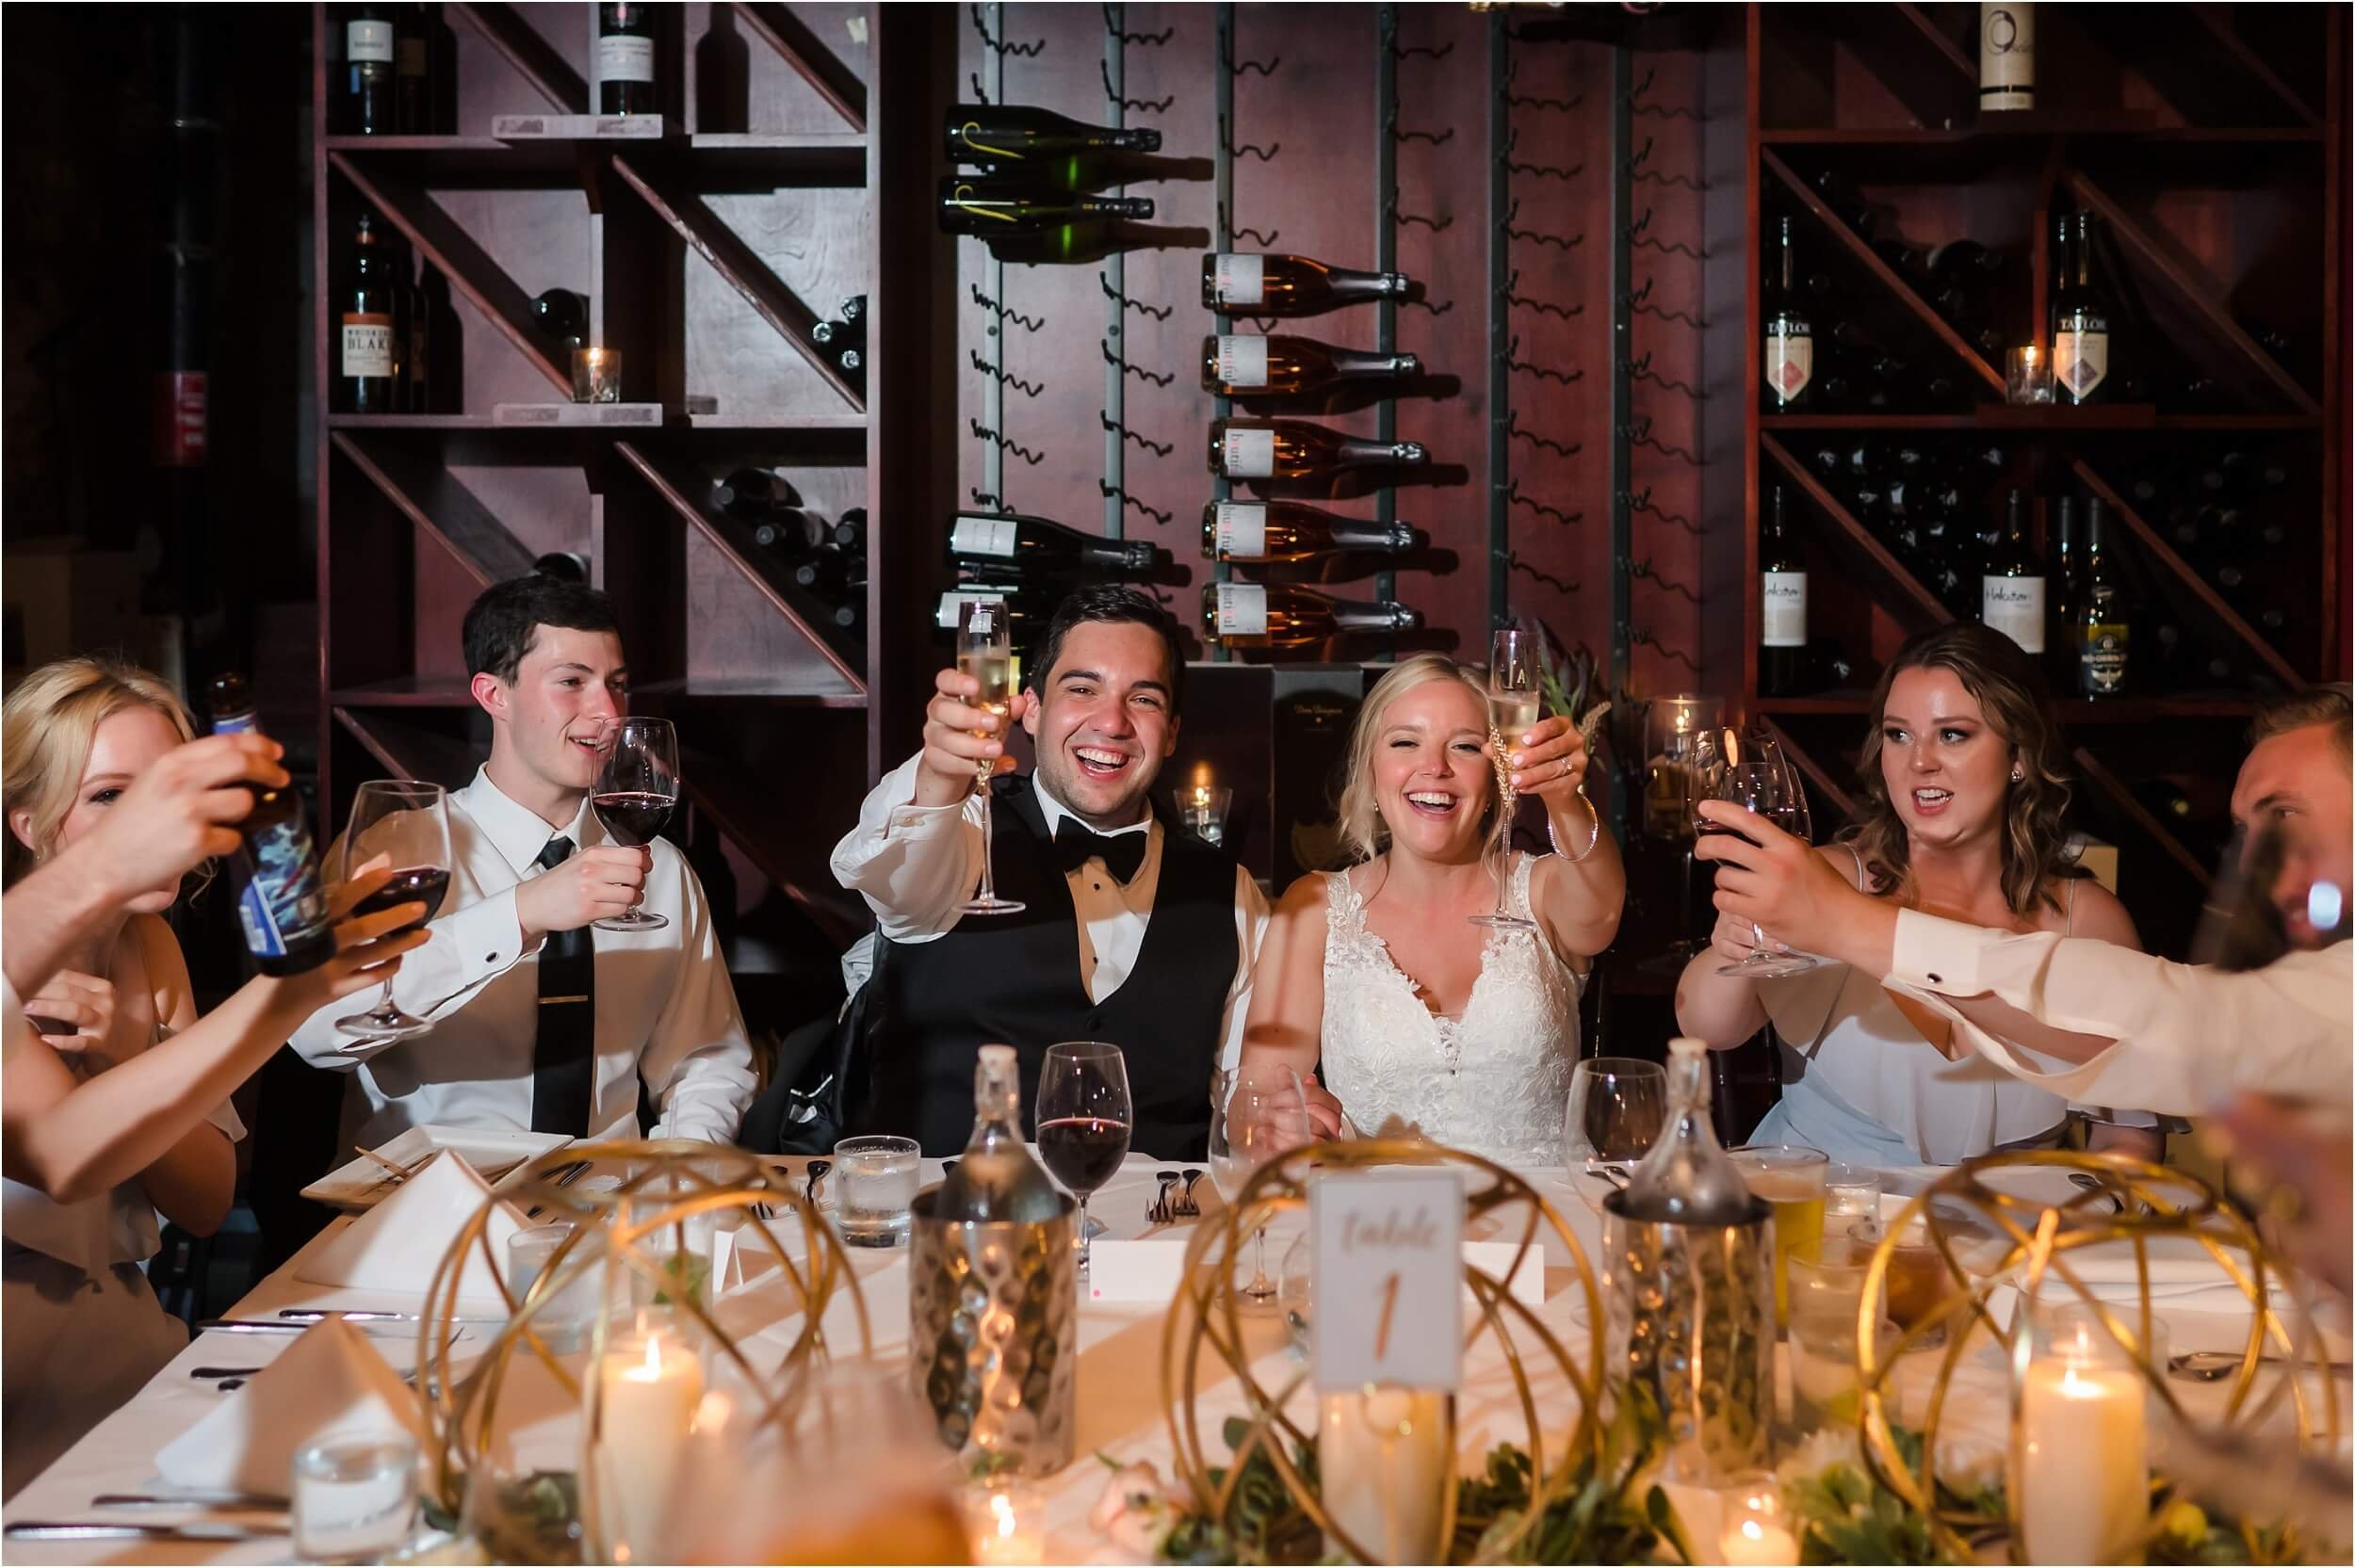  A couple and their wedding party toast before having a farm-to-table dinner at Vinology, a local favorite wine bar in downtown Ann Arbor.  